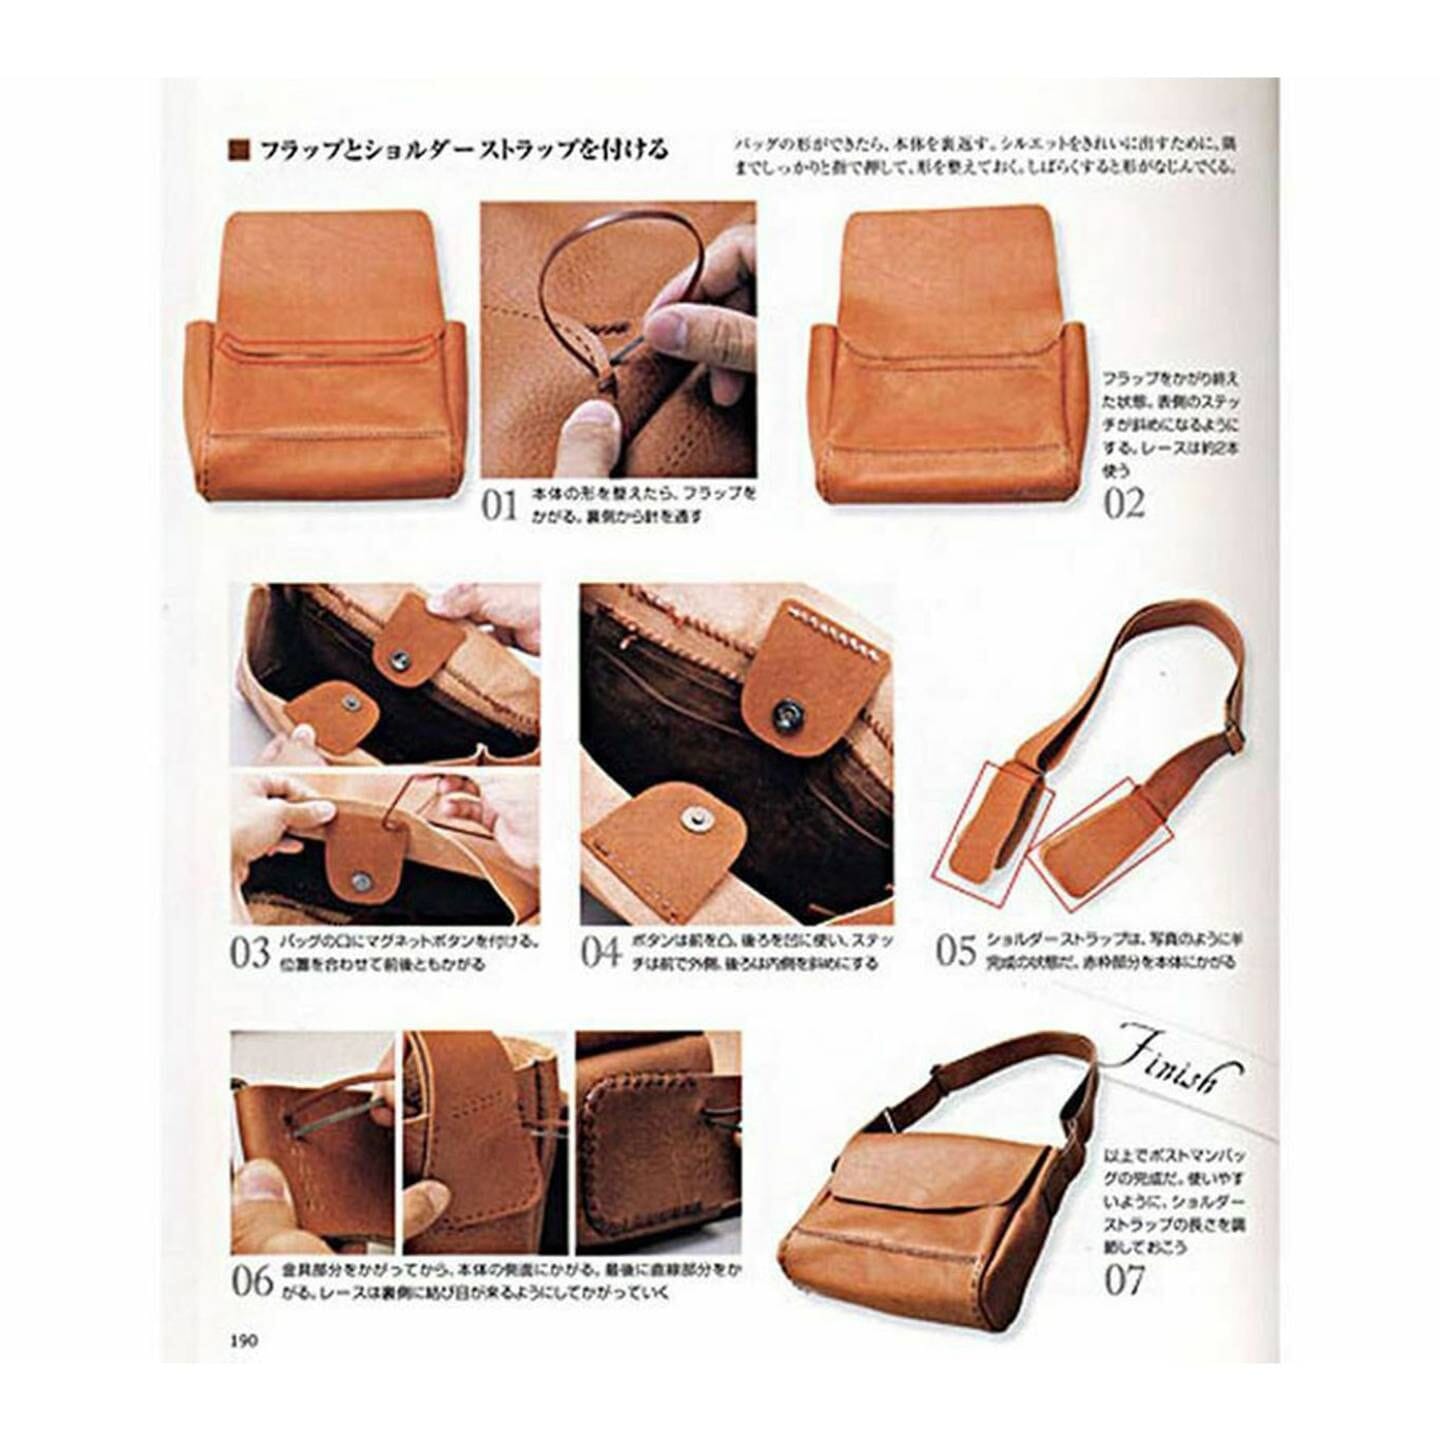 Studio Tac Lacing Leather Craft Full Color Japanese Leathercraft Guide  Book, with Pictorial Instructions, for Making Bags, Cases, & Purses